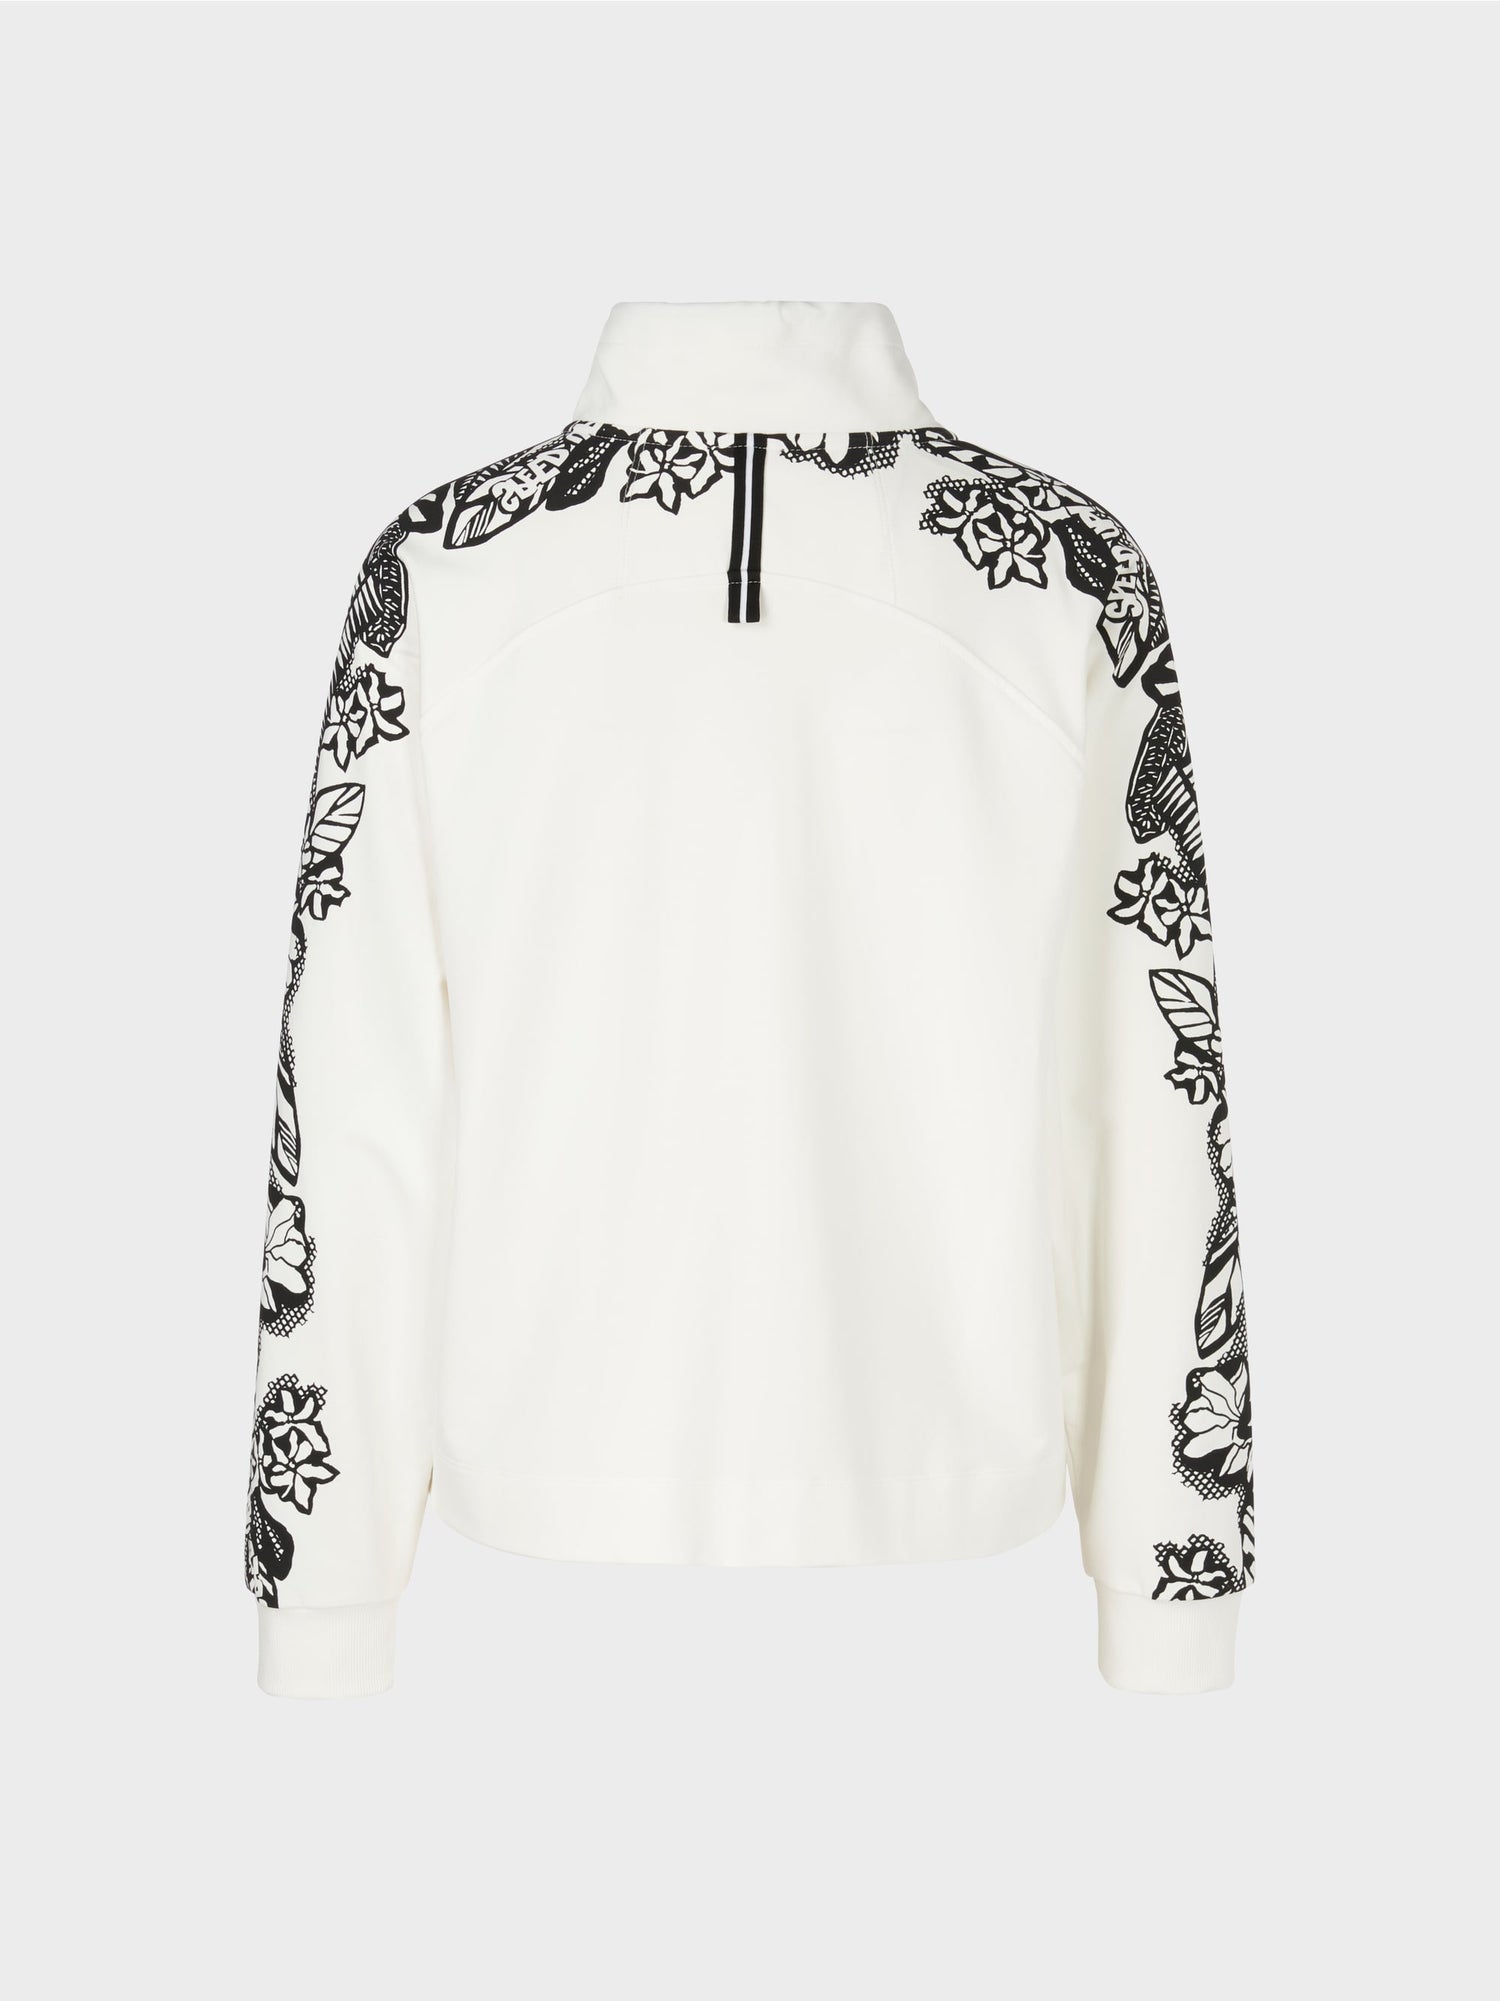 Zip-Up Jacket With Floral Print_WS 31.09 J13_190_07